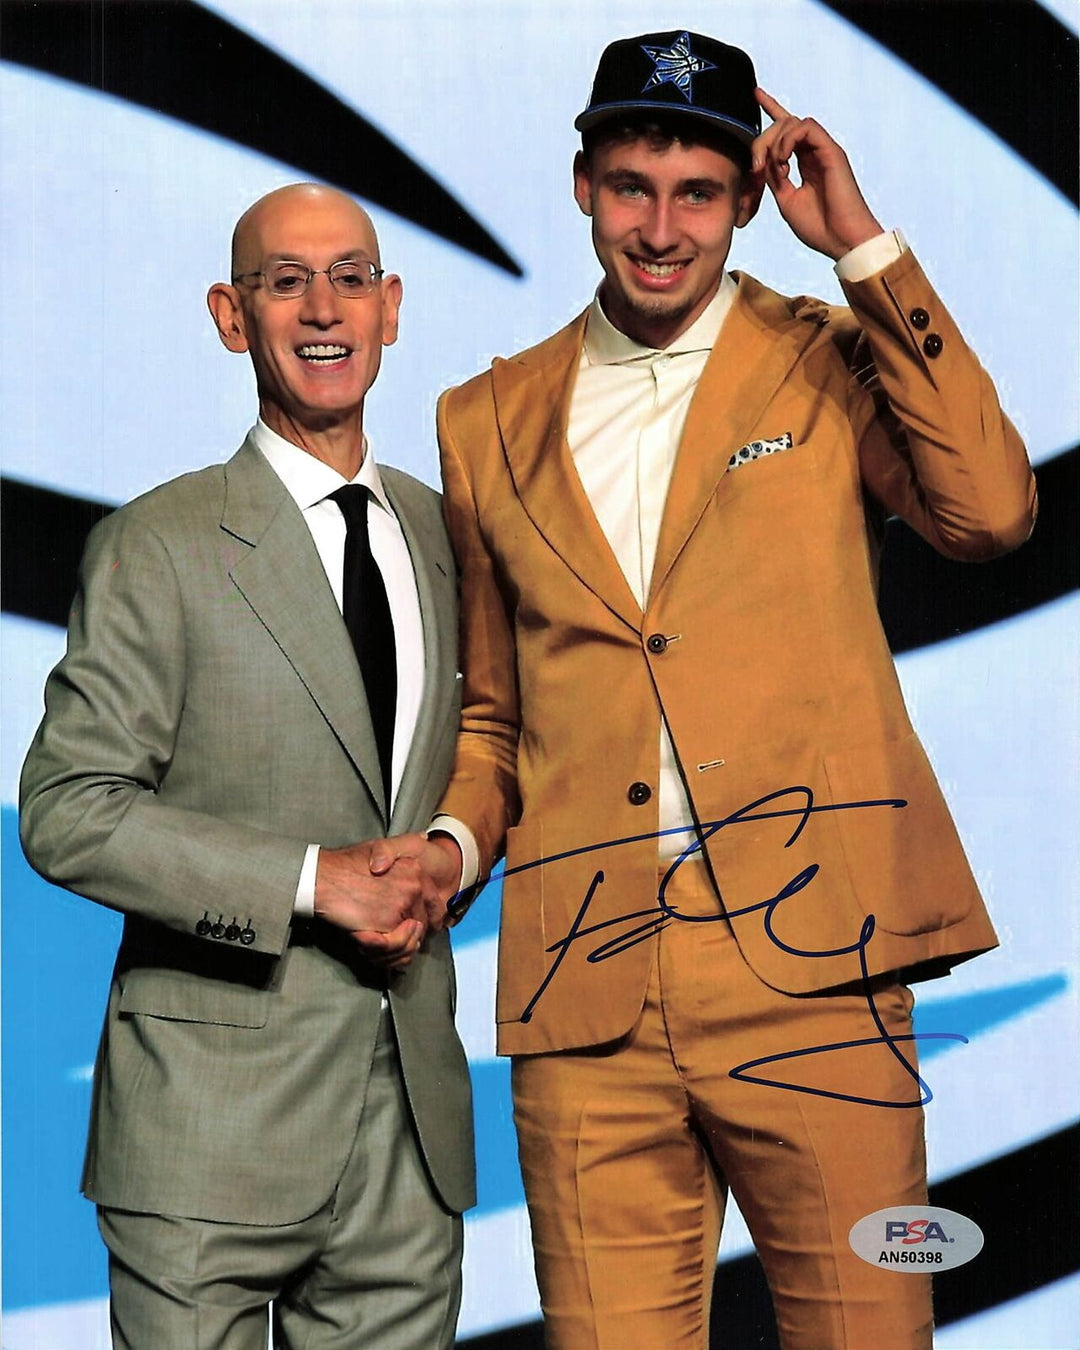 Franz Wagner signed 8x10 Photograph PSA/DNA Autographed Magic Image 1